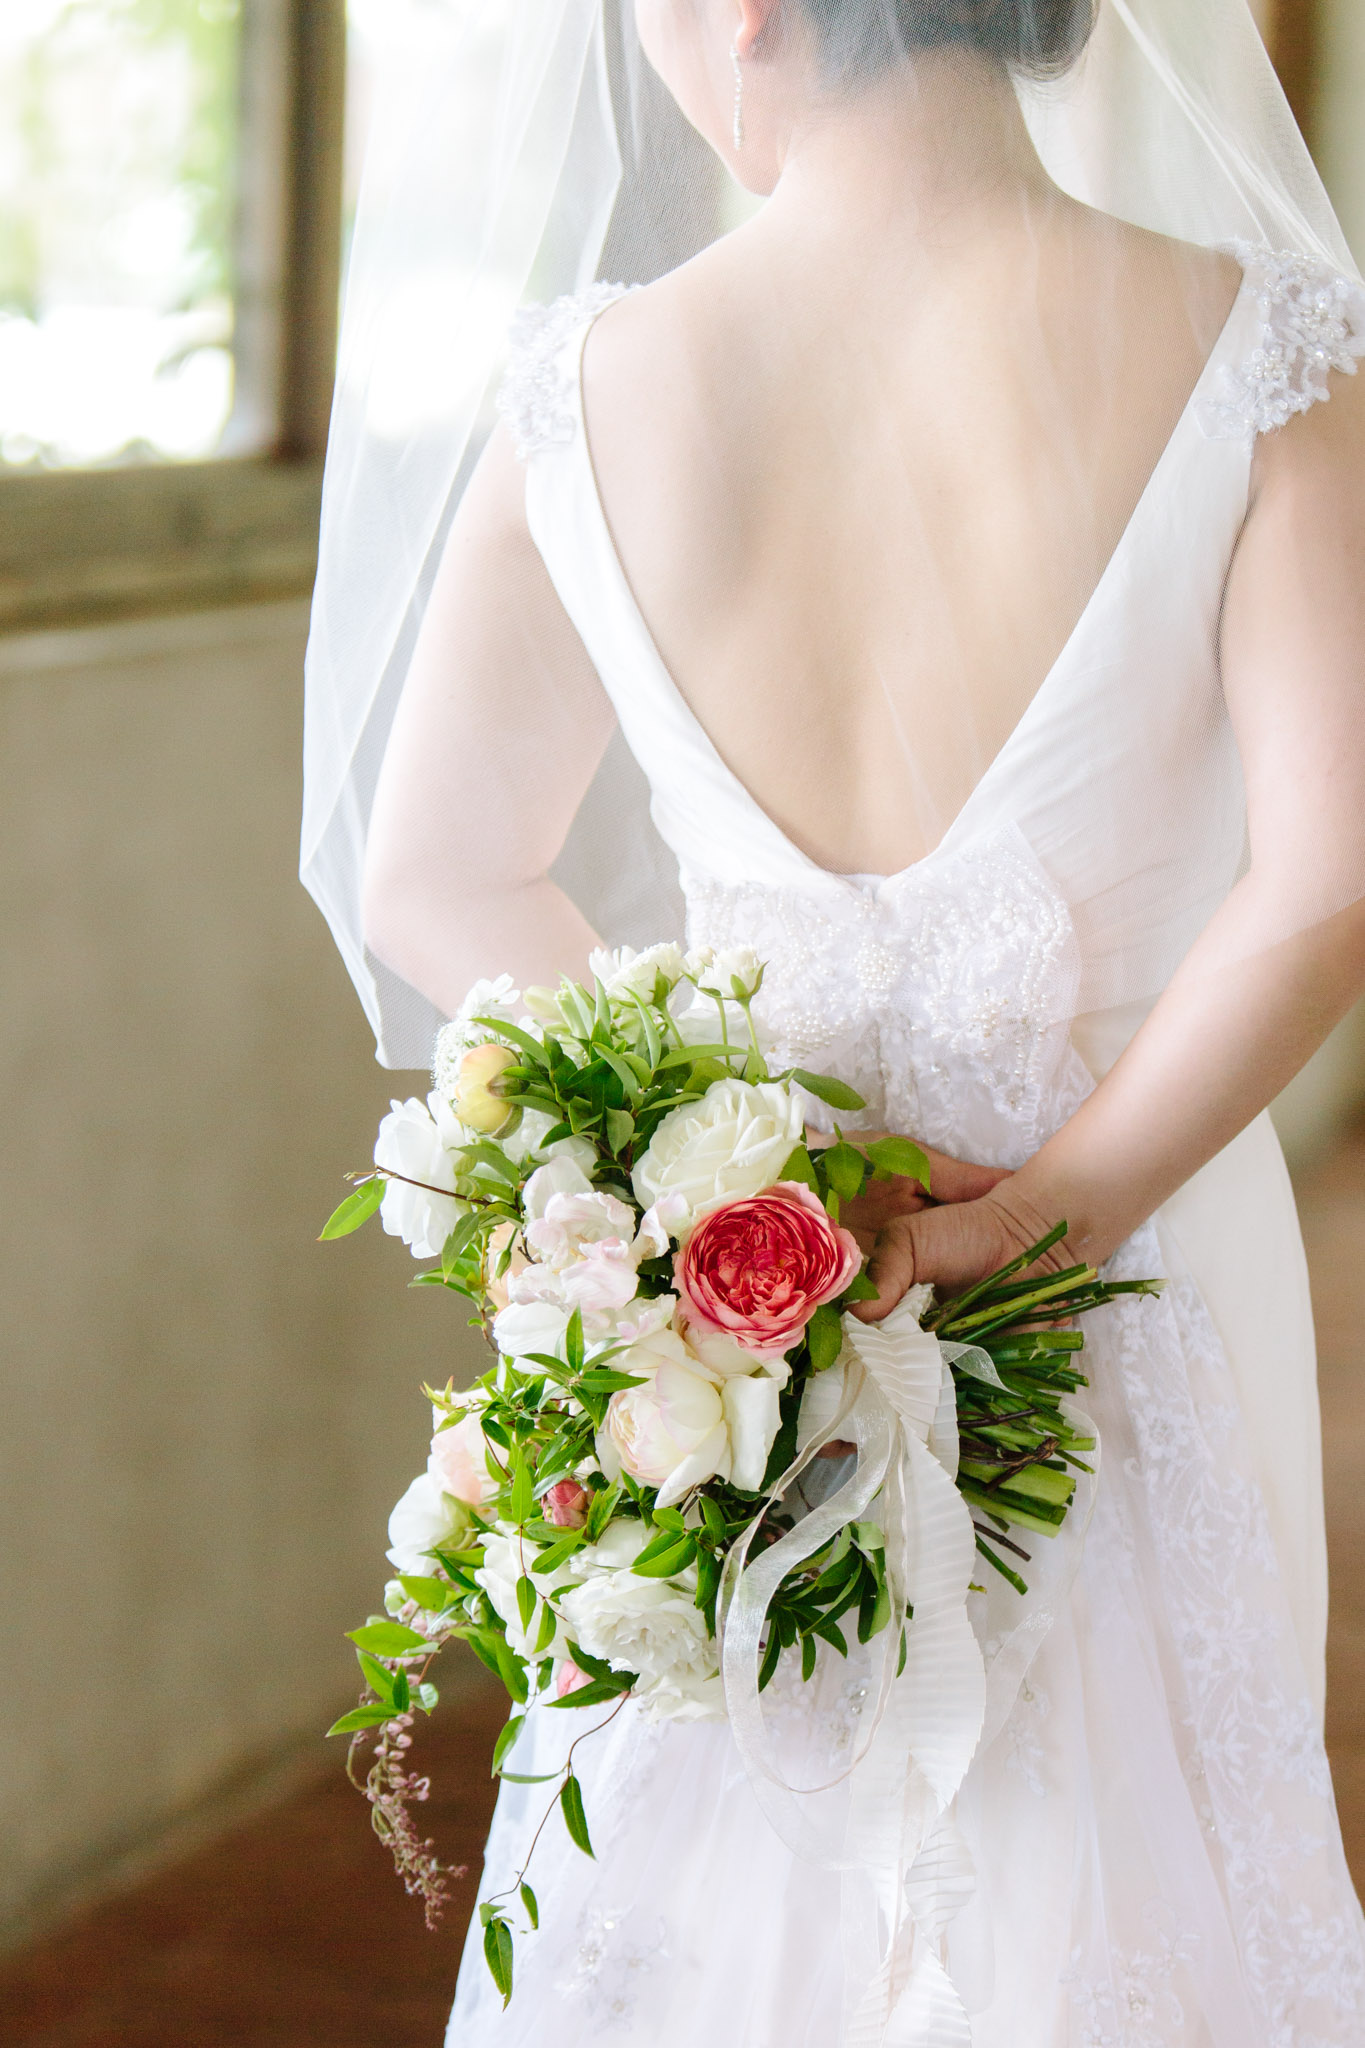 Rebecca Cerasani loves working with Amy Osaba for her fresh take on a gorgeous bridal bouquet.